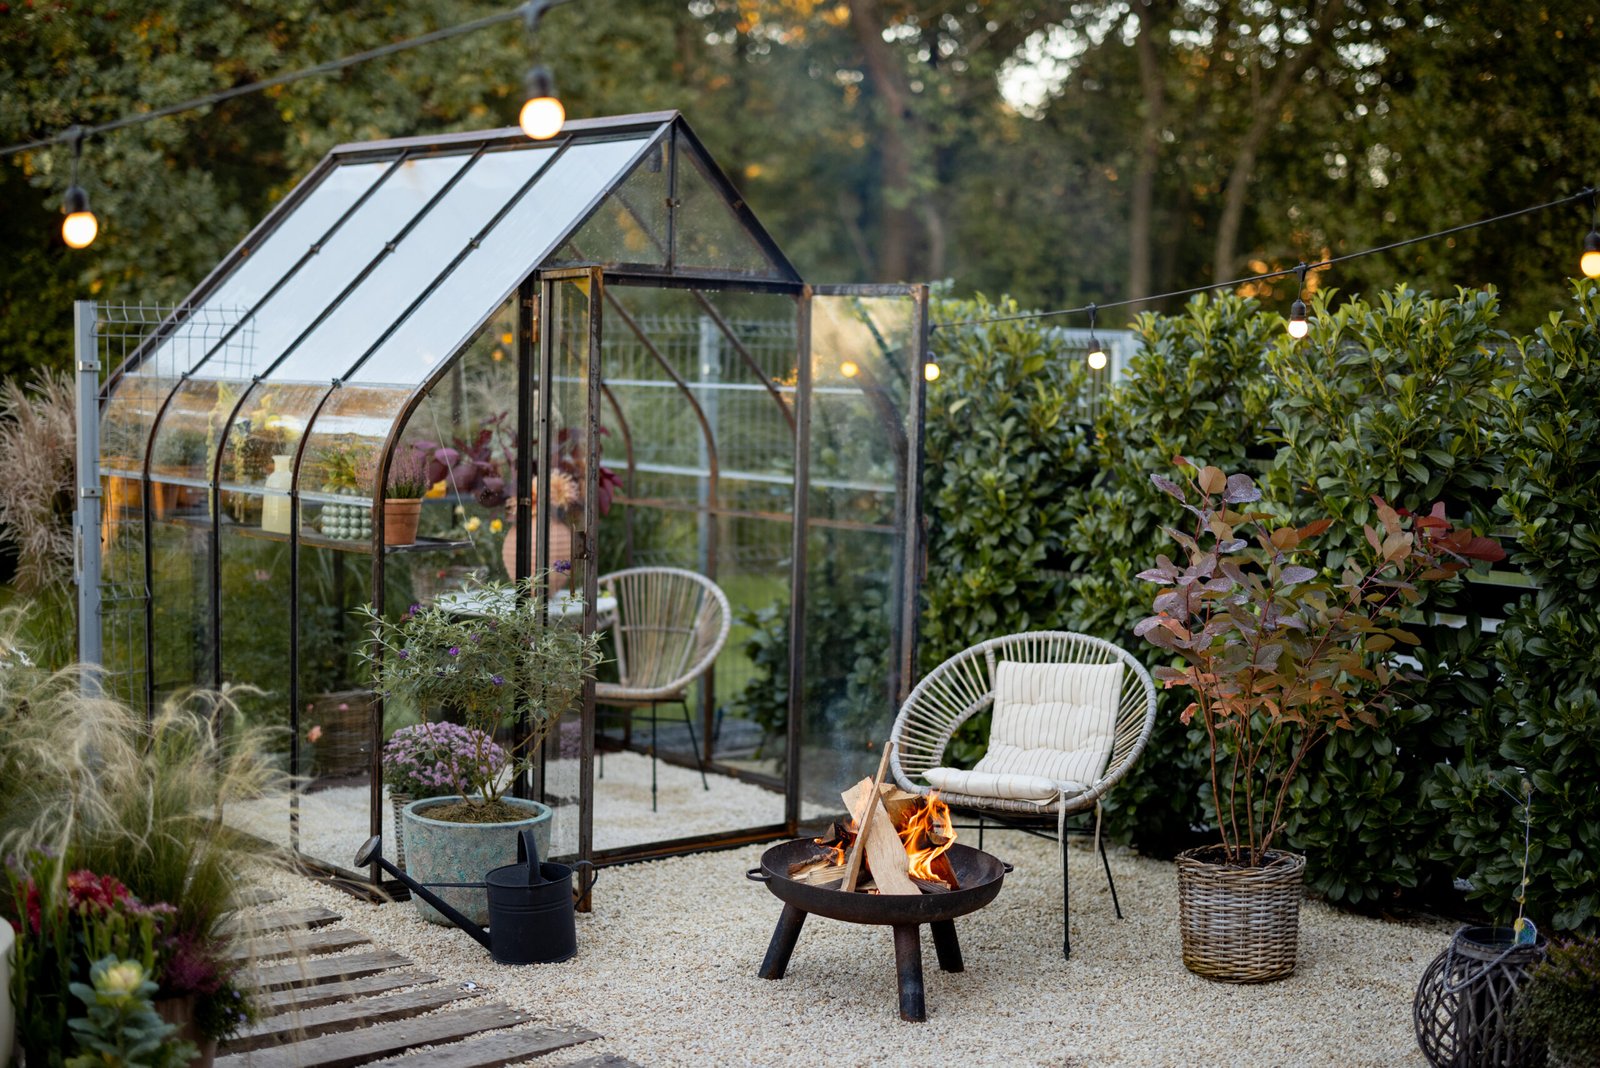 Beautiful and cozy garden with a picnic fire at lounge area and vintage greenhouse behind.